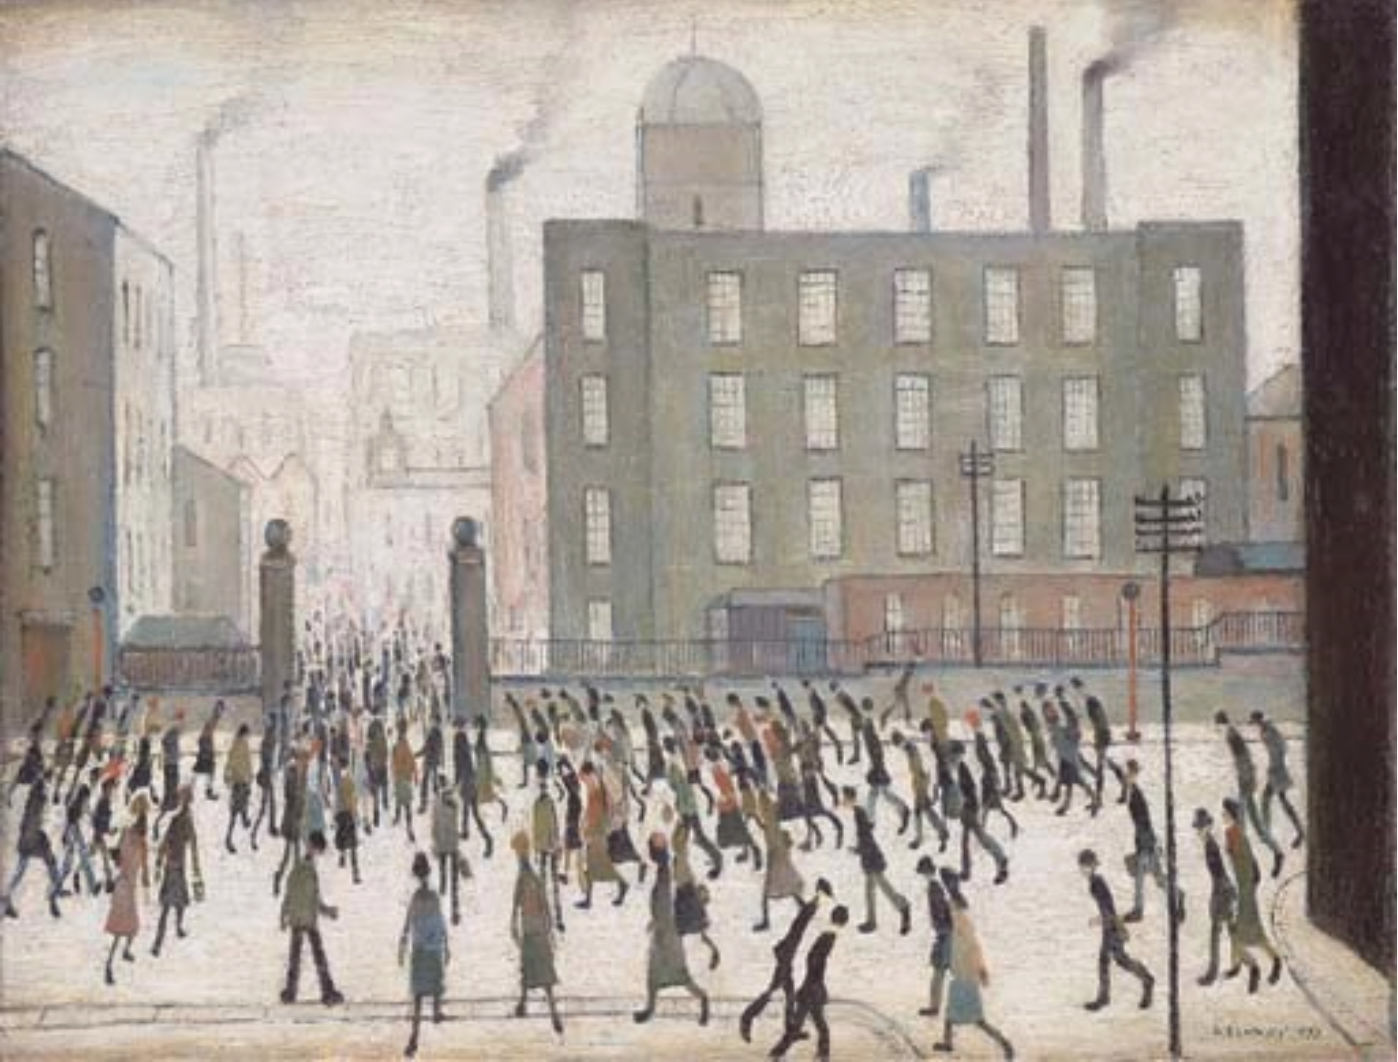 The Day Shift (1952) by Laurence Stephen Lowry (1887 - 1976), English artist.